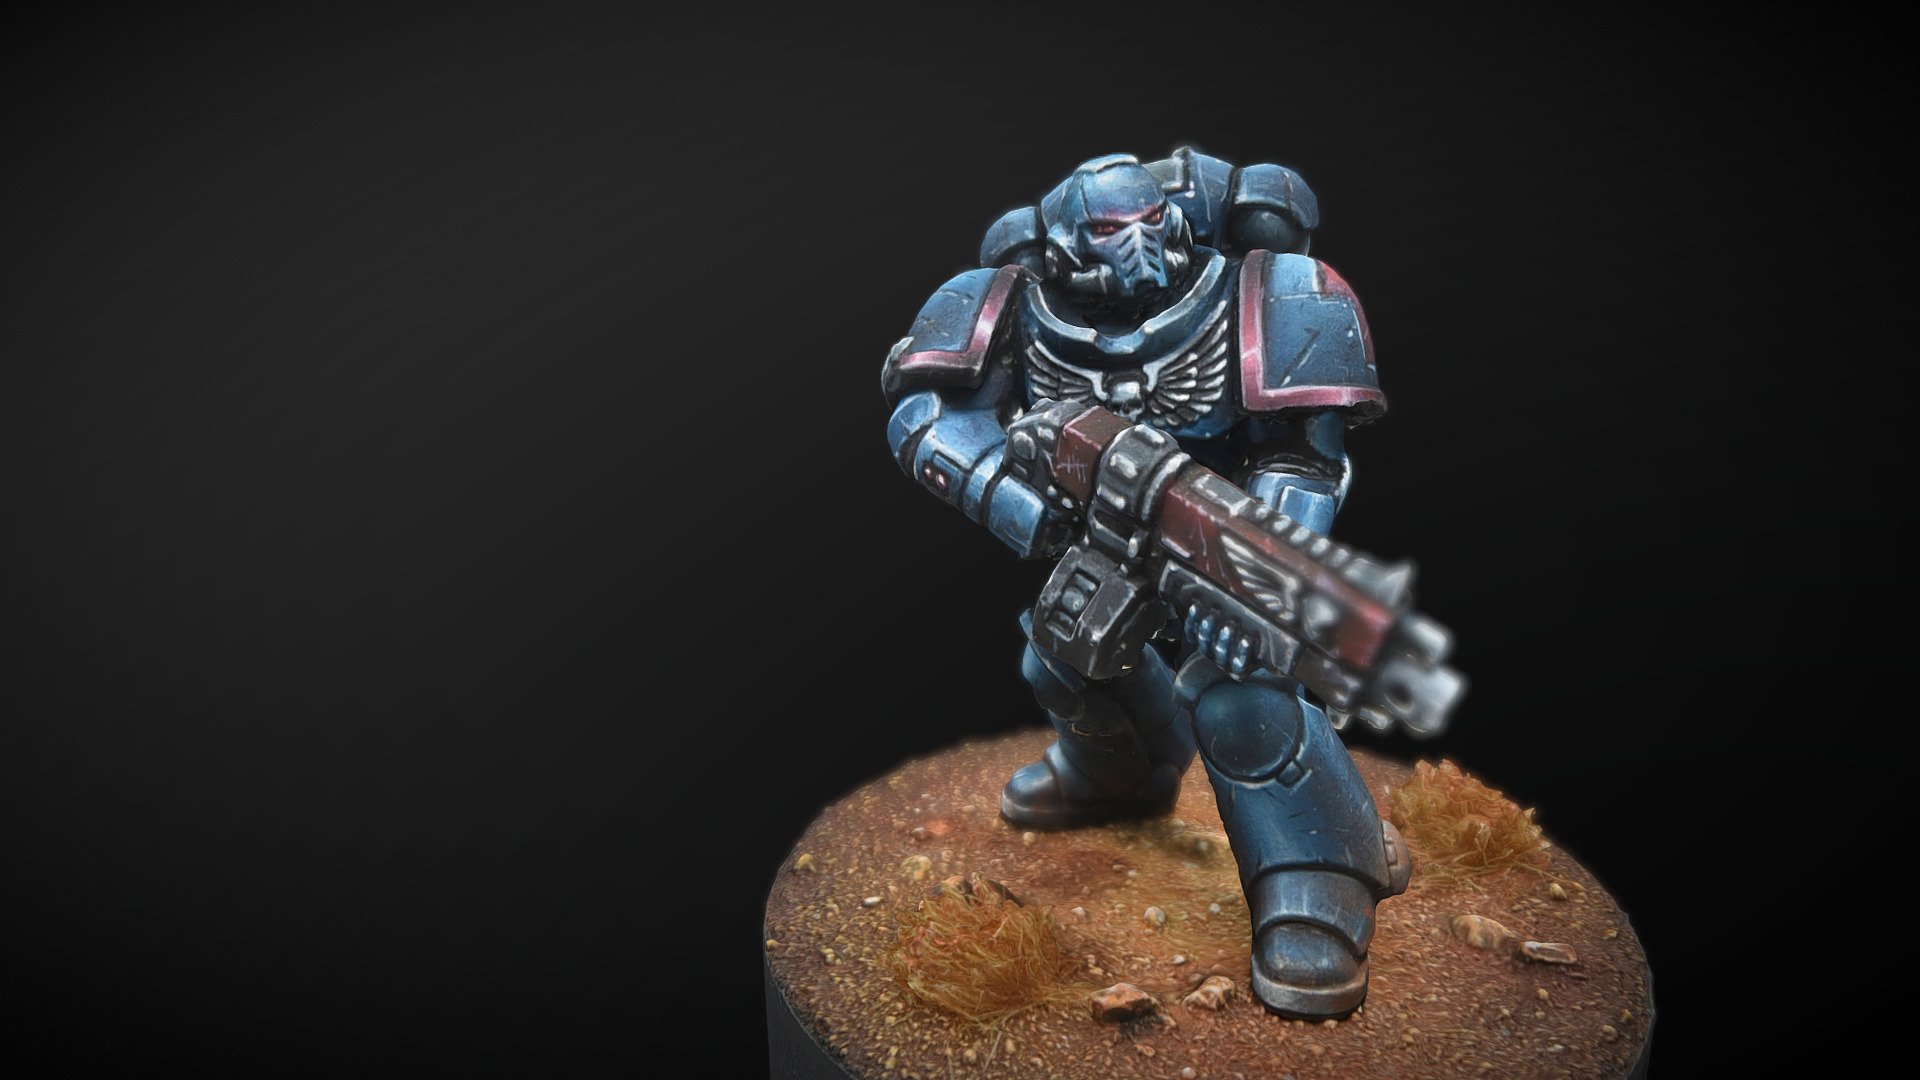 A painting test I made, trying to represent a very shiny metallic armour. The miniature is a Primaris Space Marine from the Warhammer 40k universe.

Reconstructed in metashape from 111 pictures 3d model